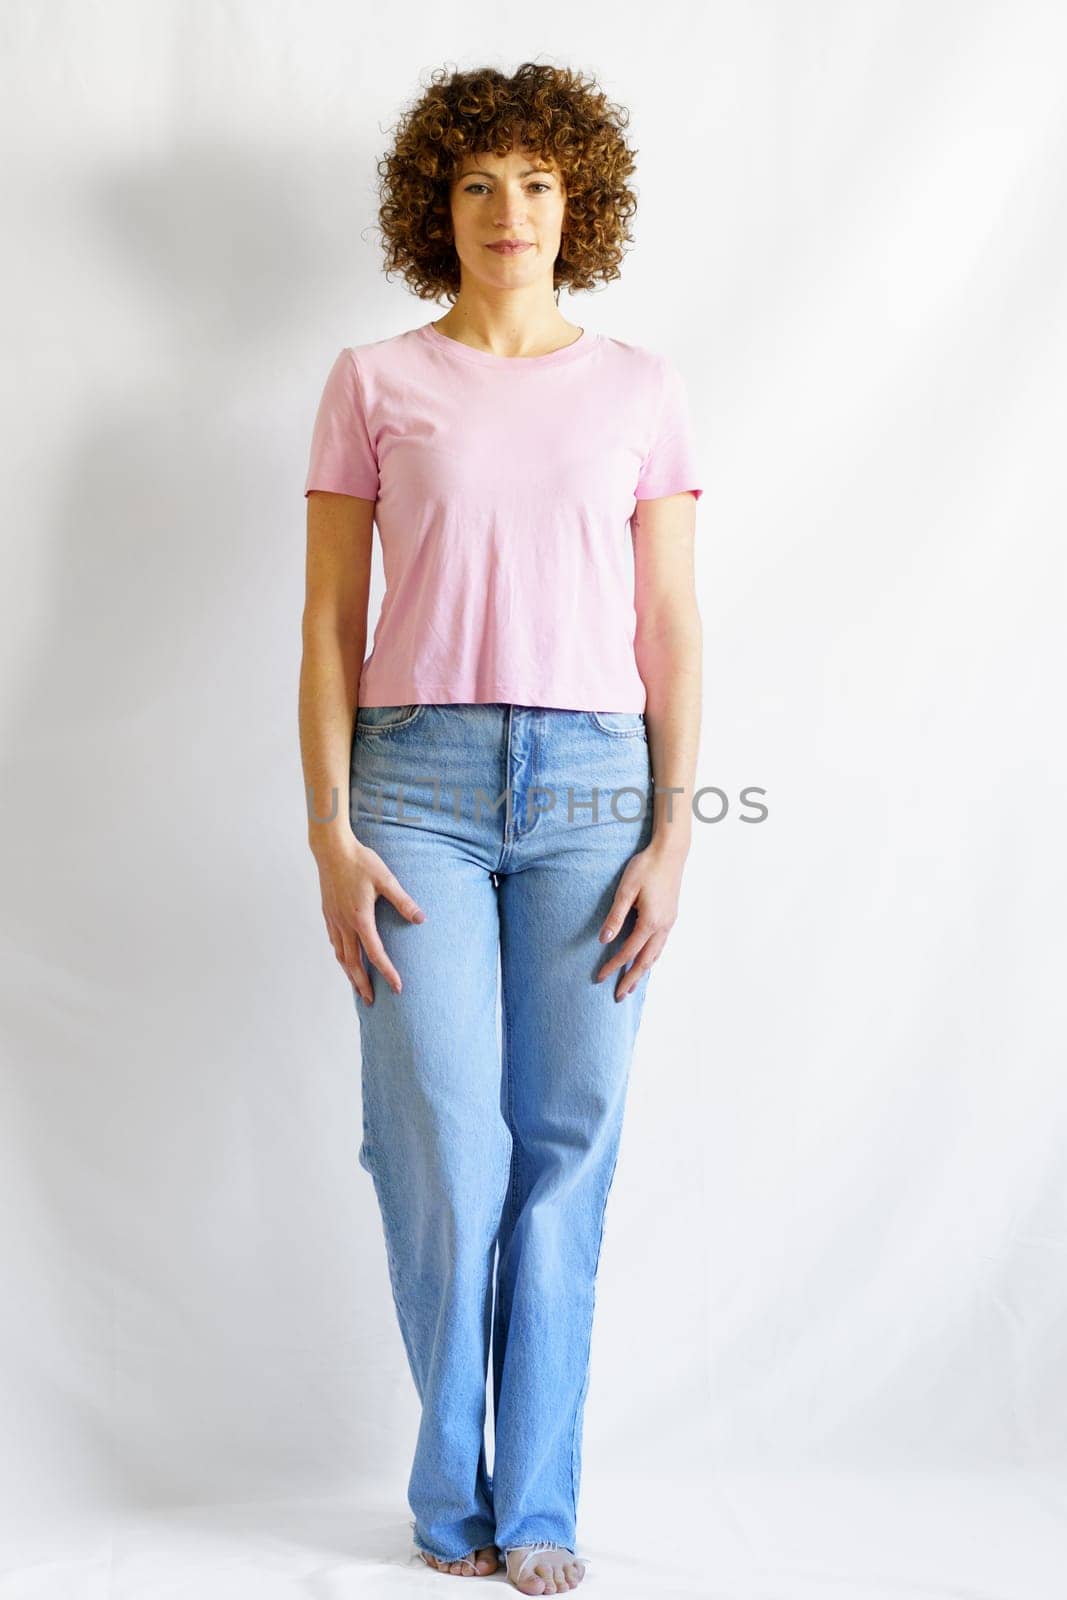 Full body of curly haired female in jeans and pink t-shirt leaning on white wall looking at camera